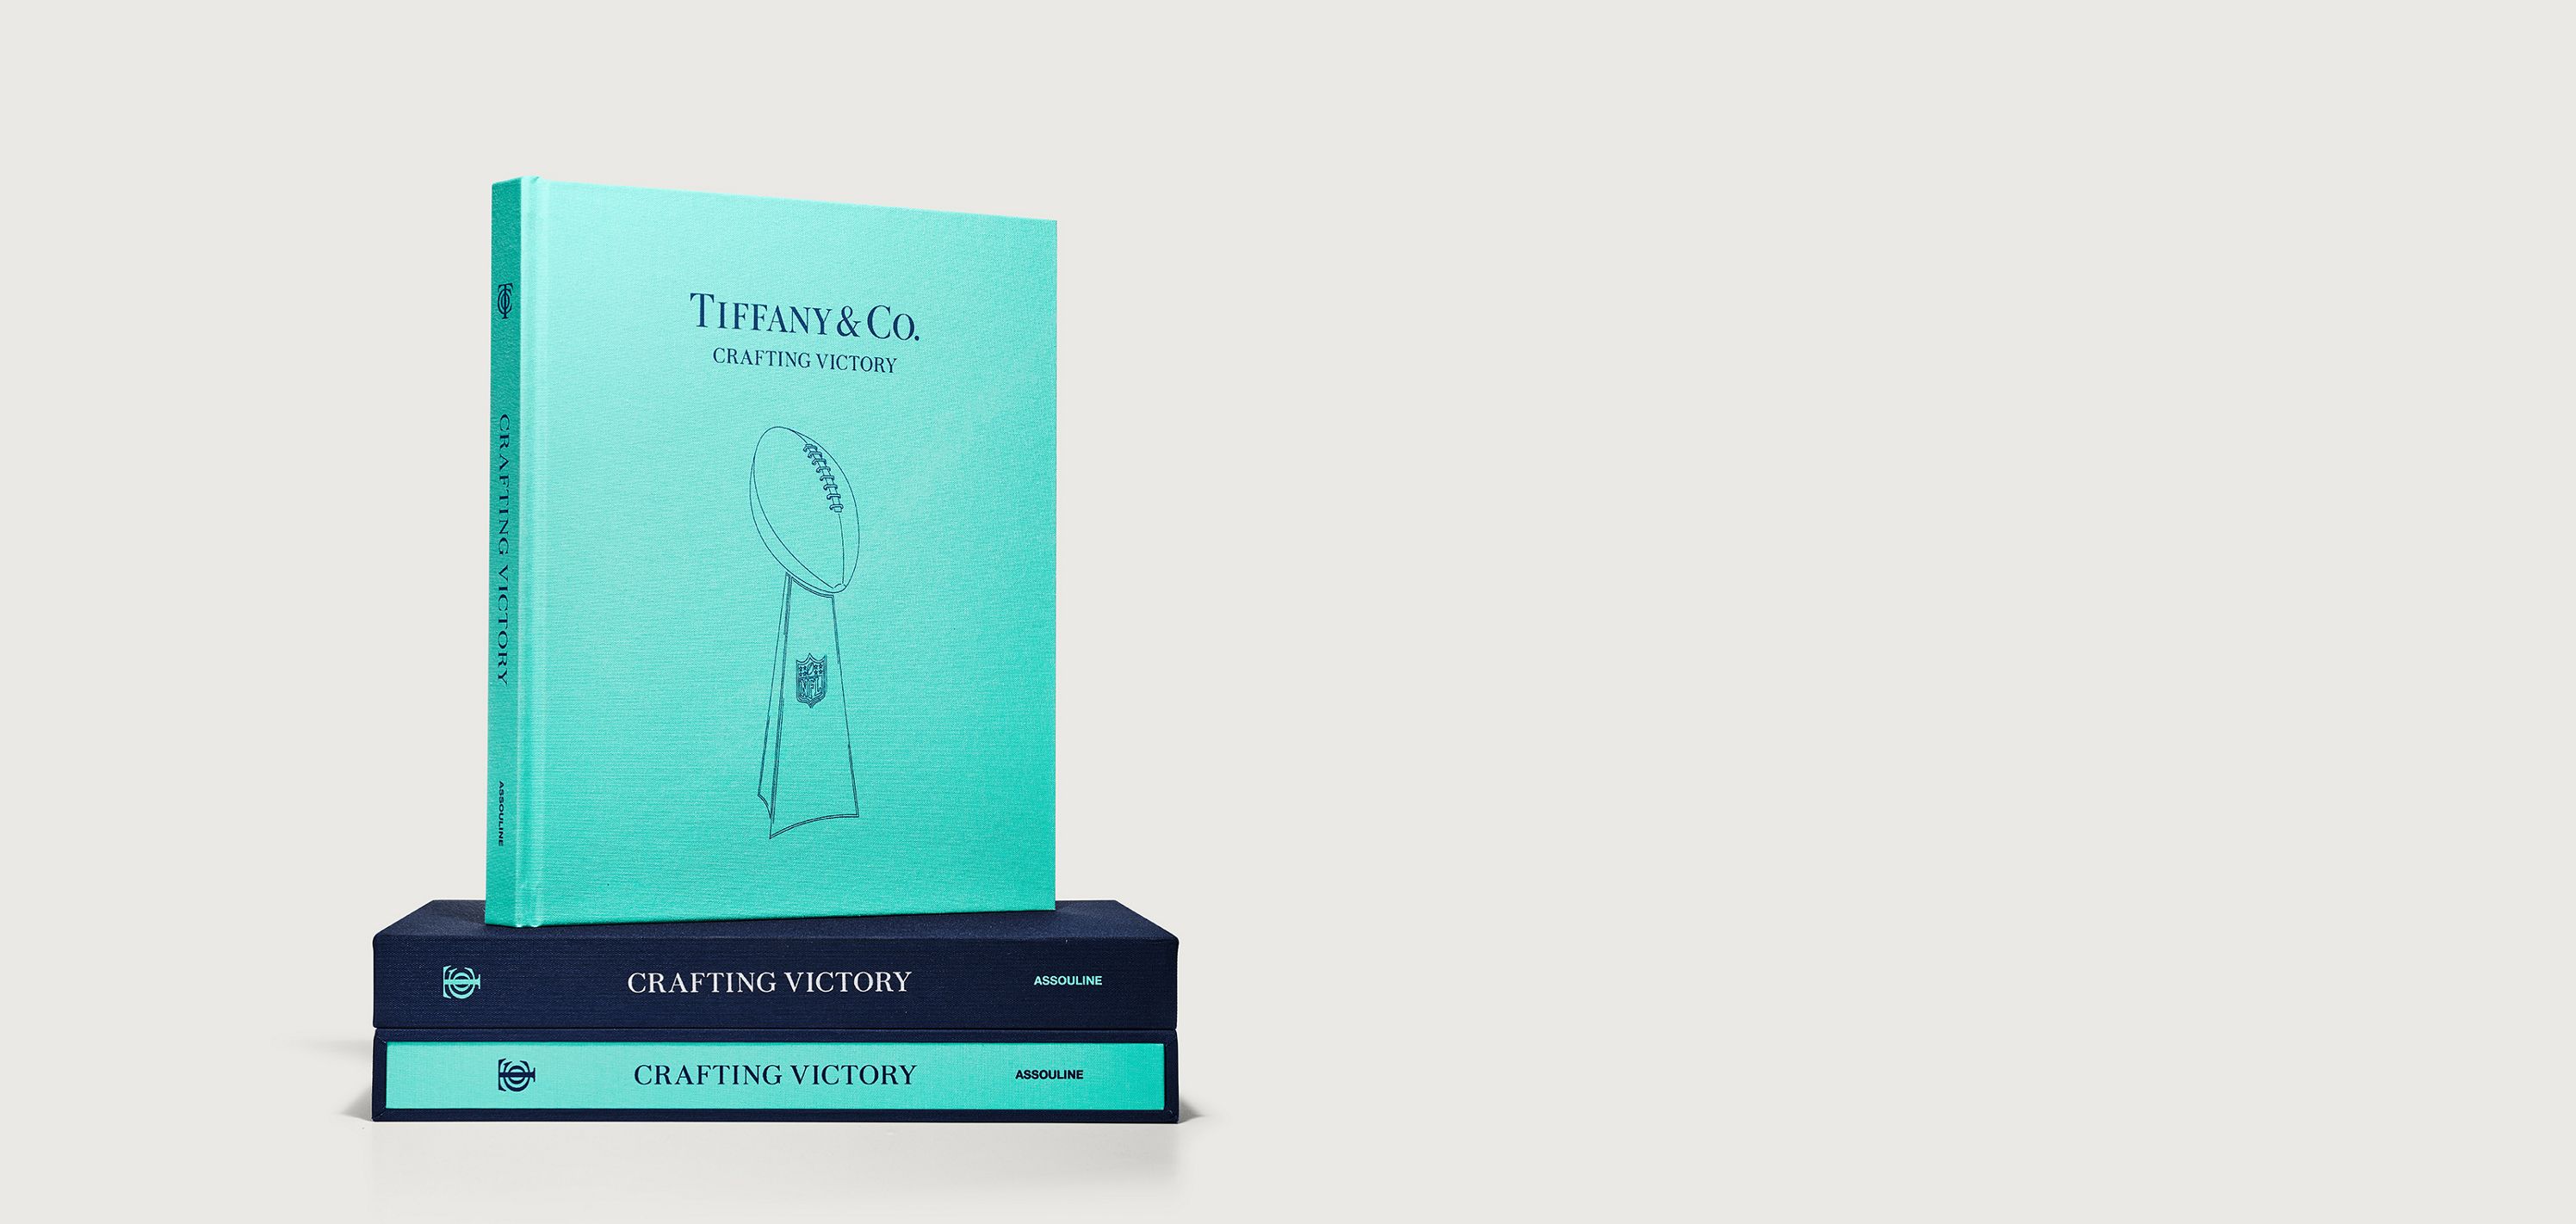 Find the Perfect Present With Tiffany & Co.'s Holiday Gift Guide